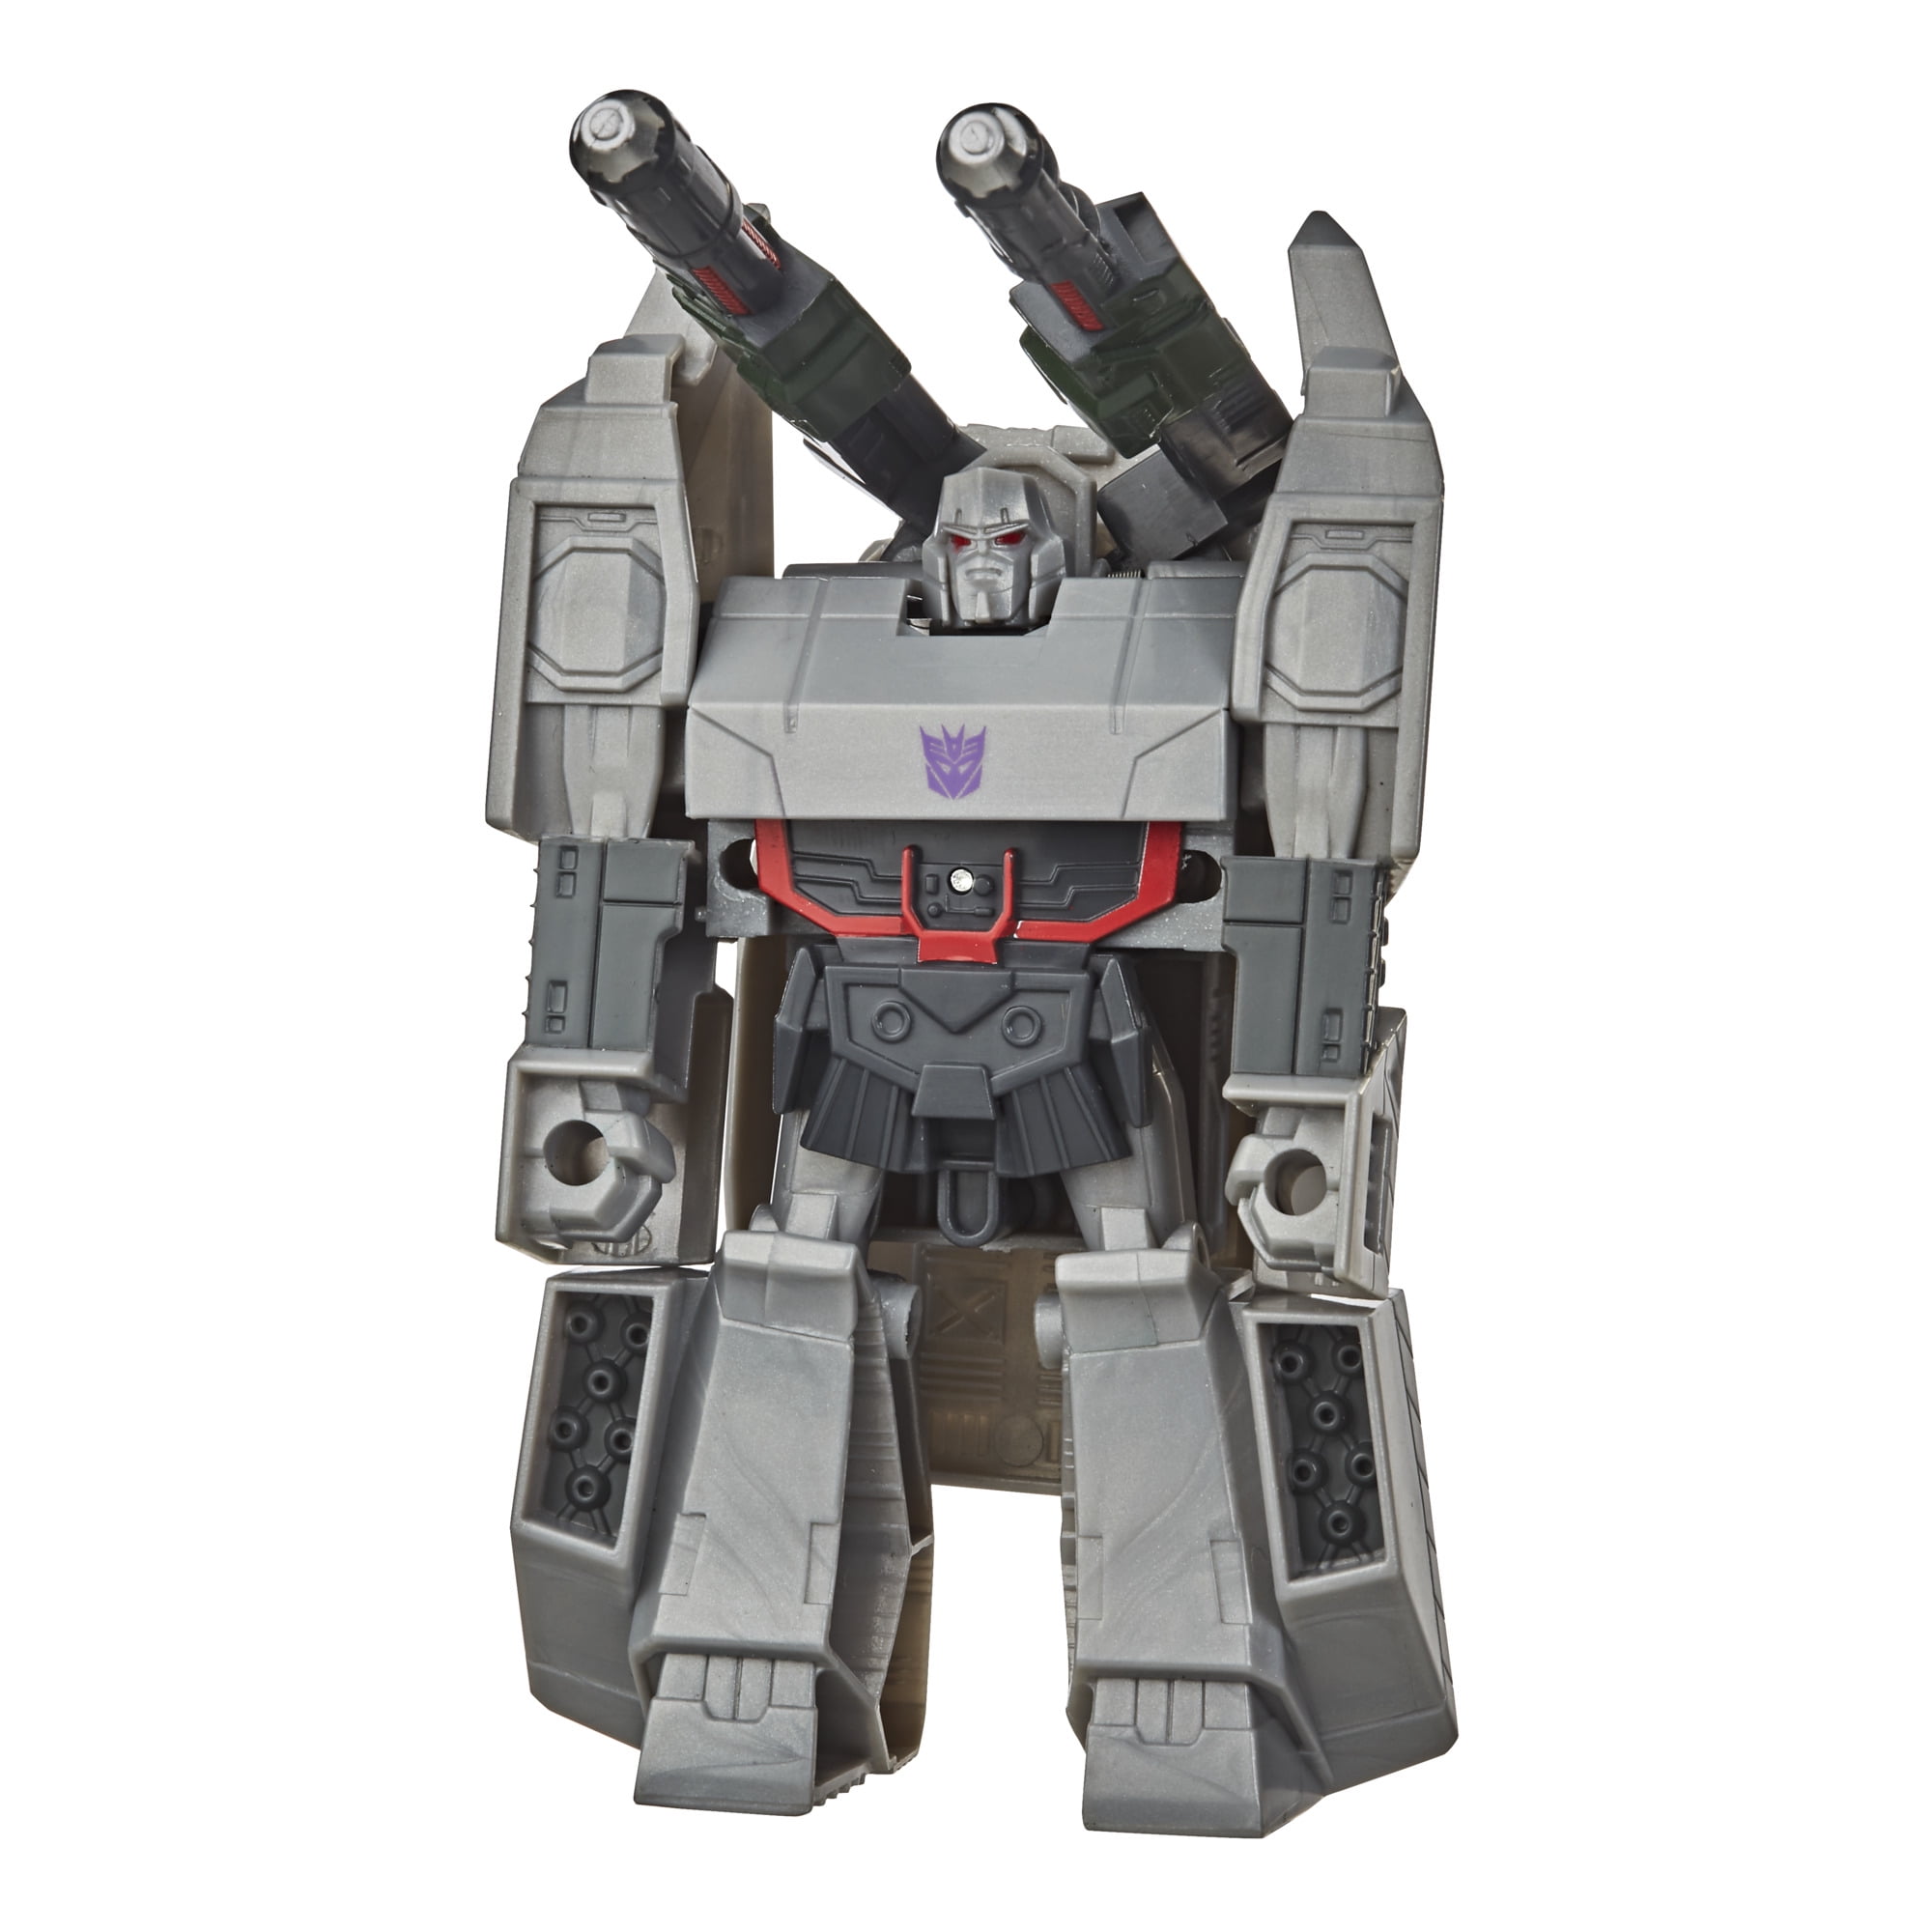 Transformers Bumblebee Cyberverse toys Megatron-X Action Figure Toy 1-Step 4in 